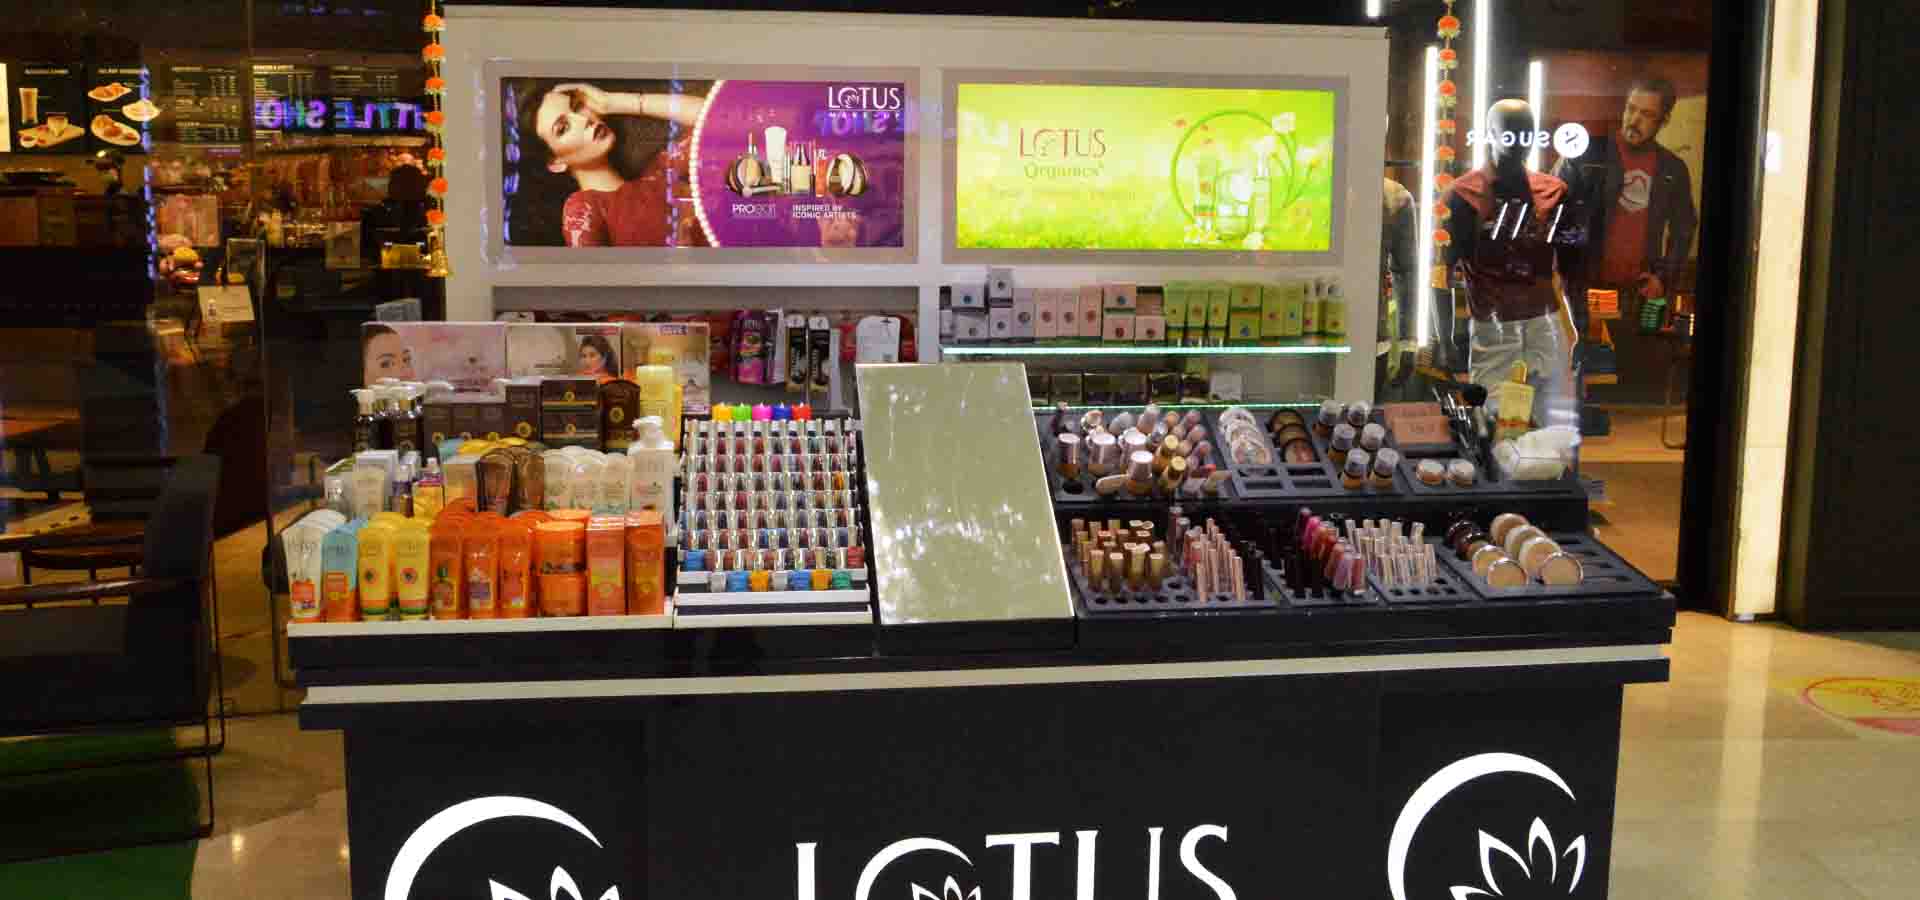 Lotus Herbals store photos in mall